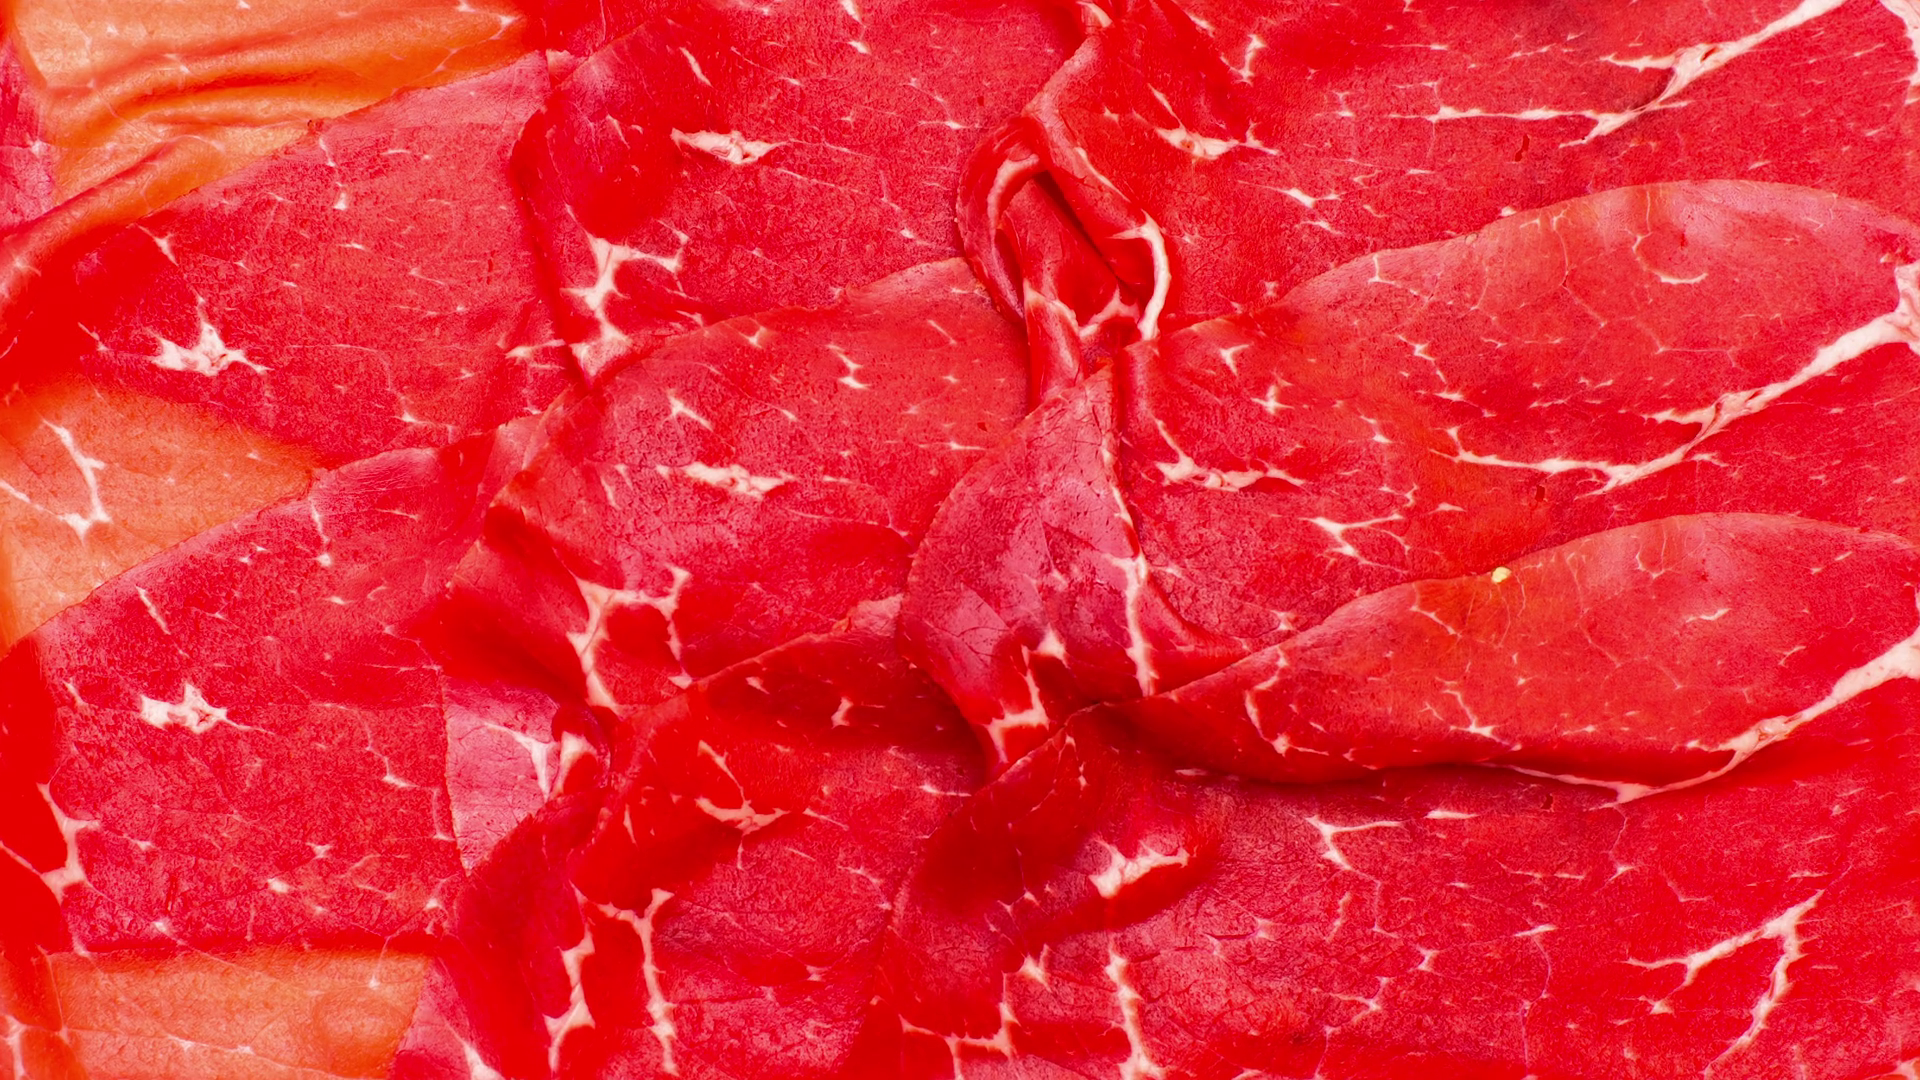 Raw meat texture photo